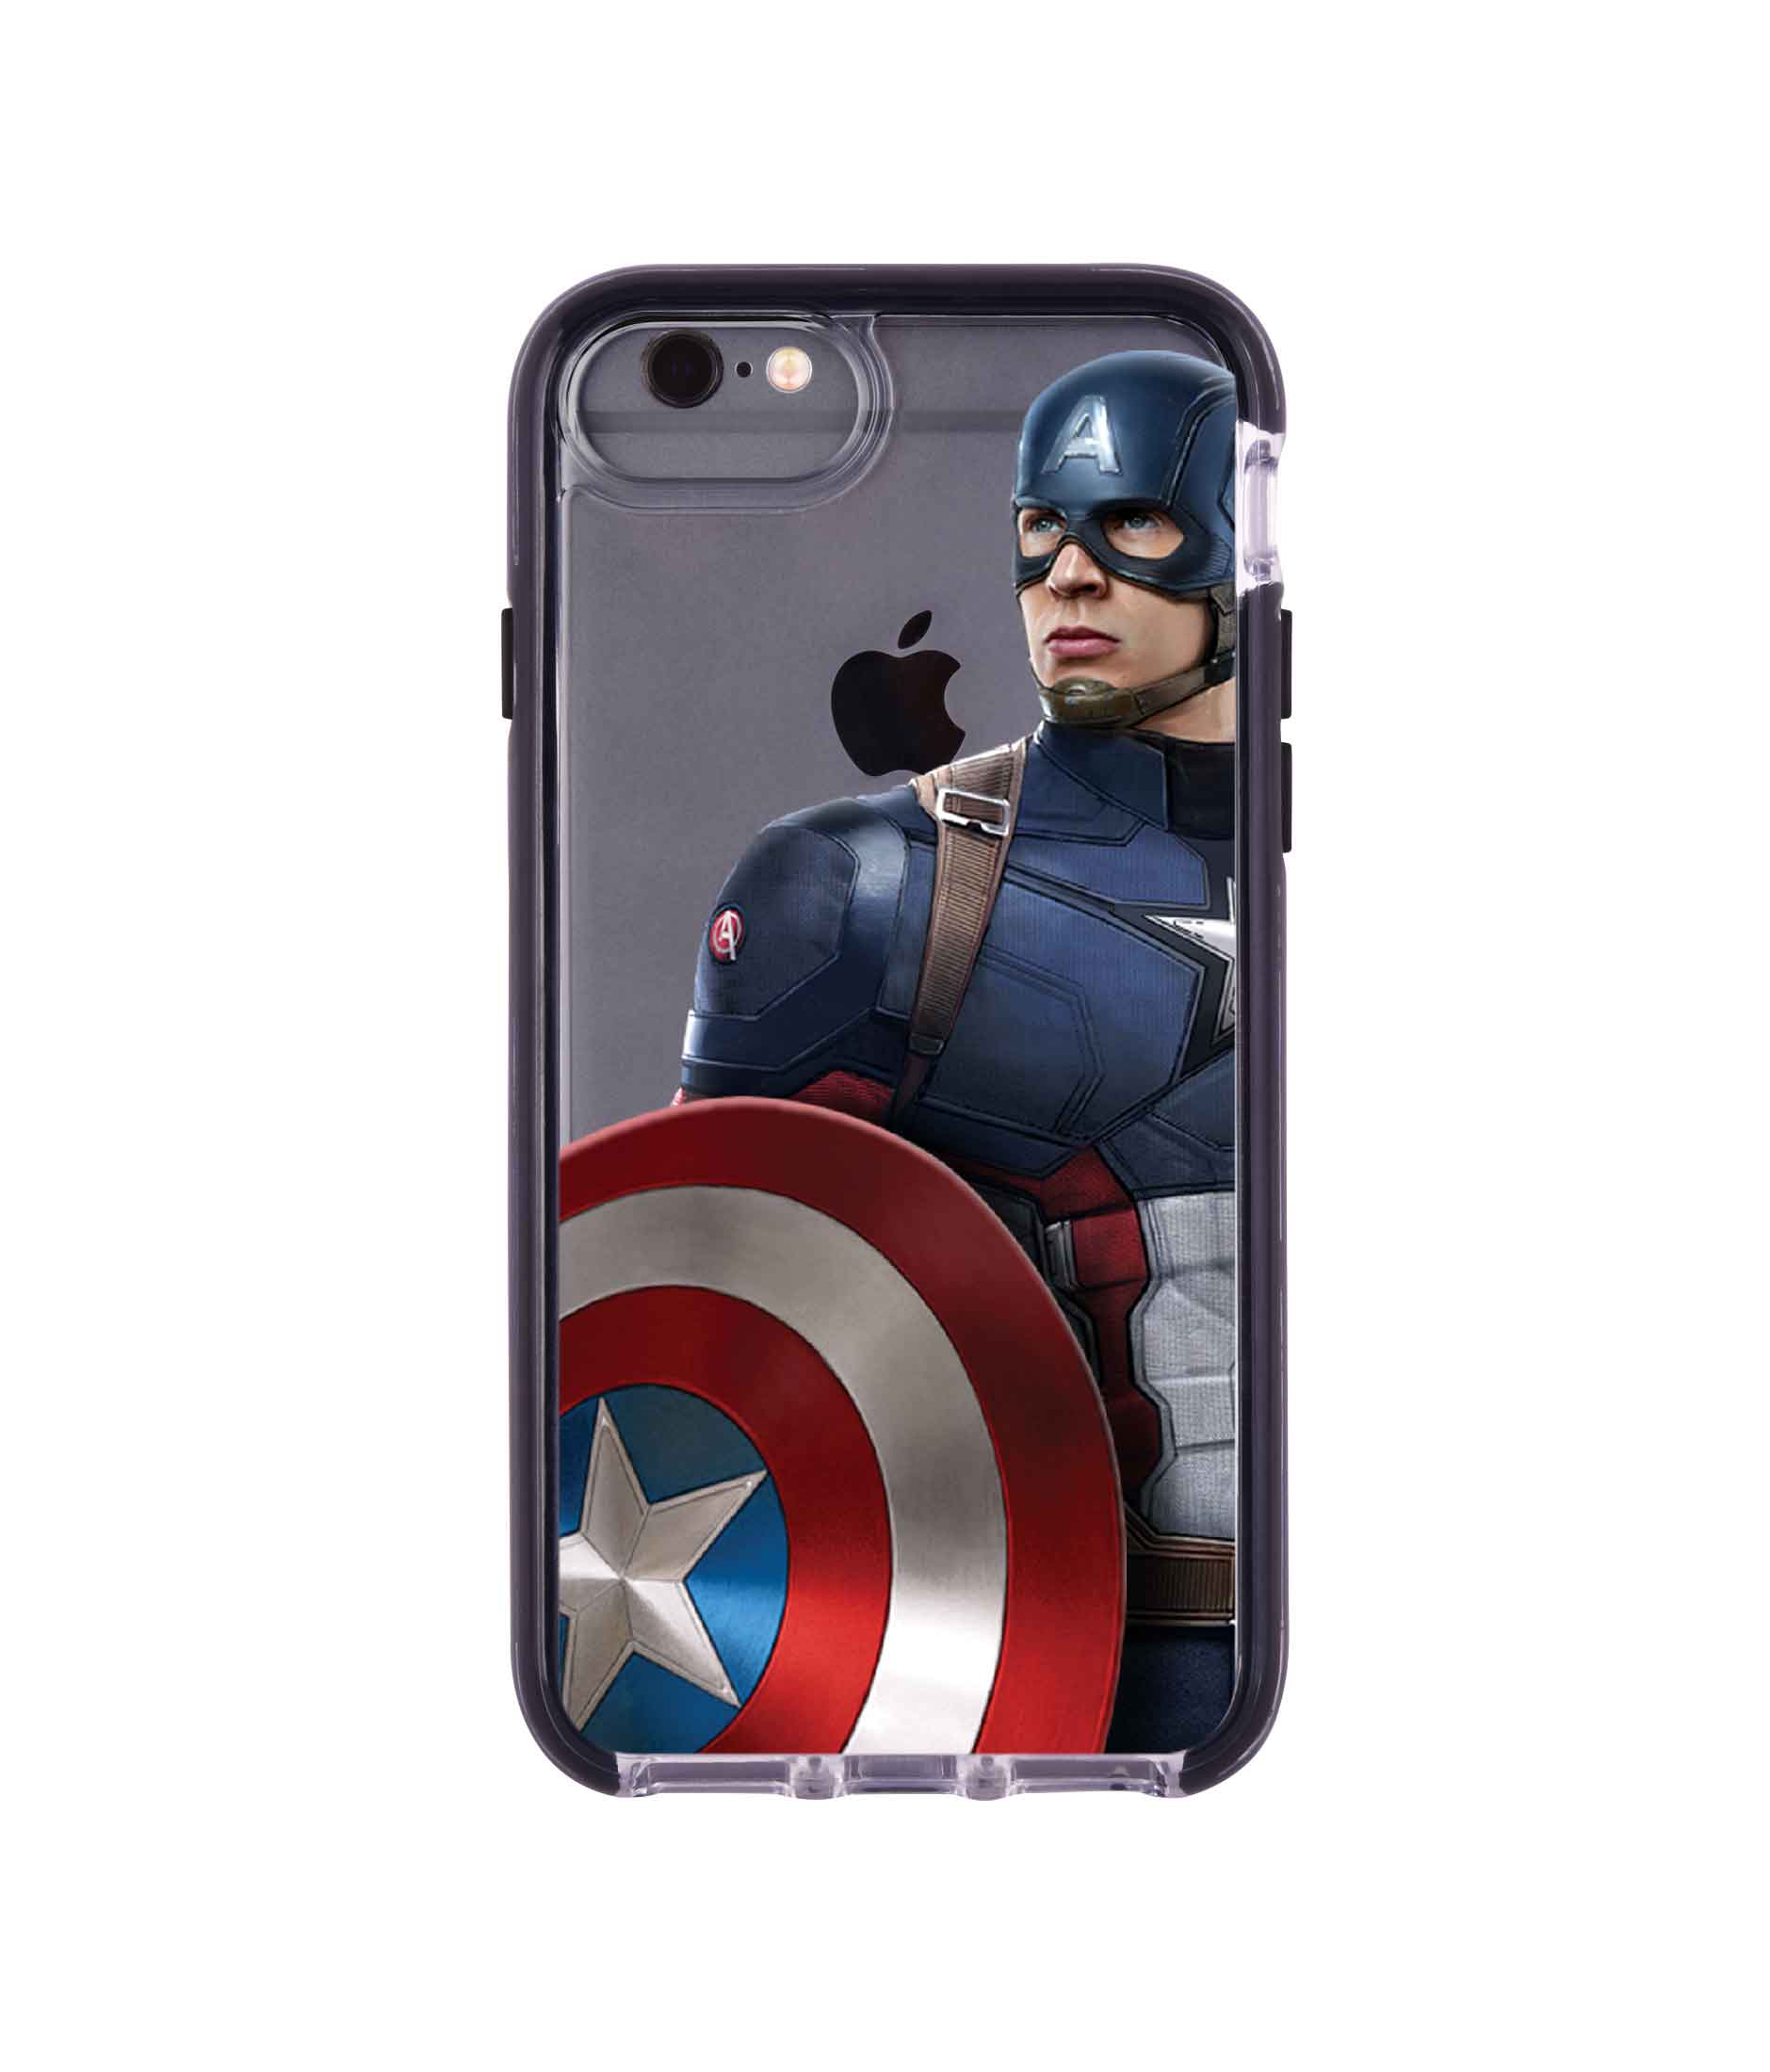 Team Blue Captain - Extreme Phone Case for iPhone 6